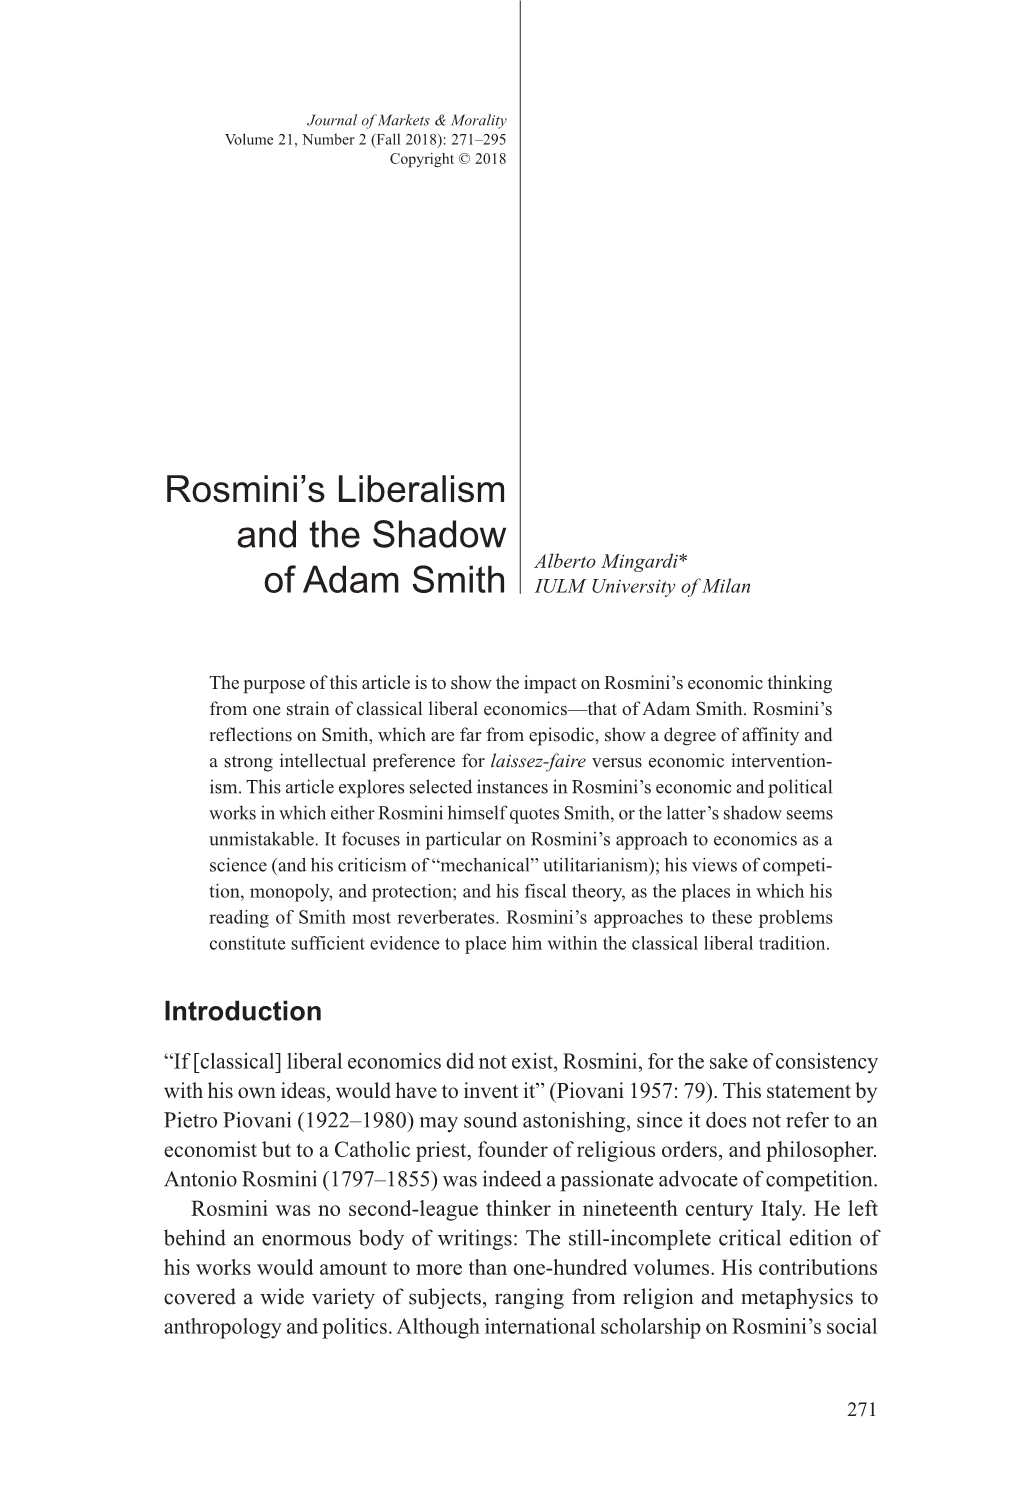 Rosmini's Liberalism and the Shadow of Adam Smith